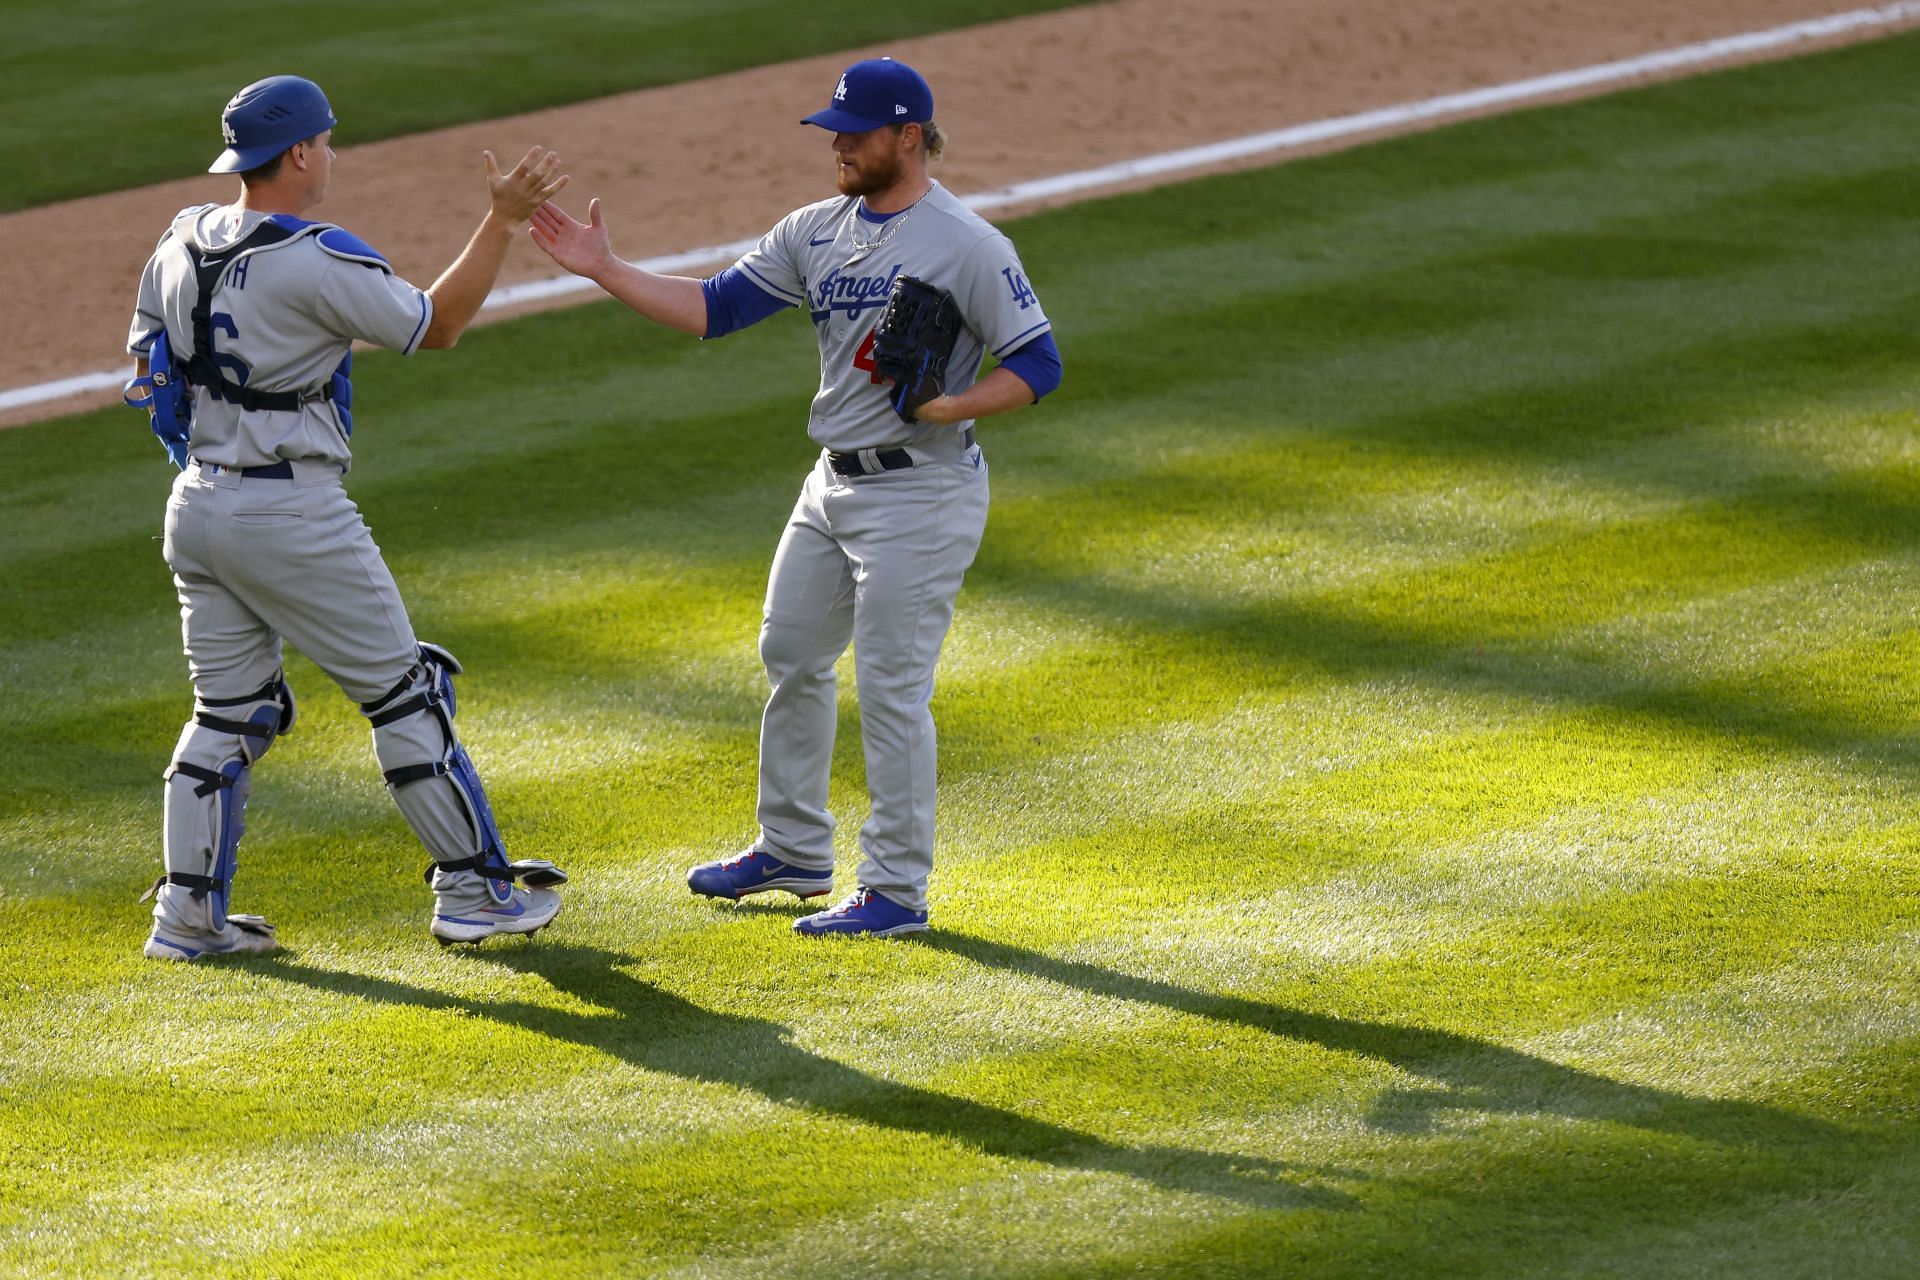 Craig Kimbrel earns himself his first save on LA Dodgers Opening Day against the Colorado Rockies